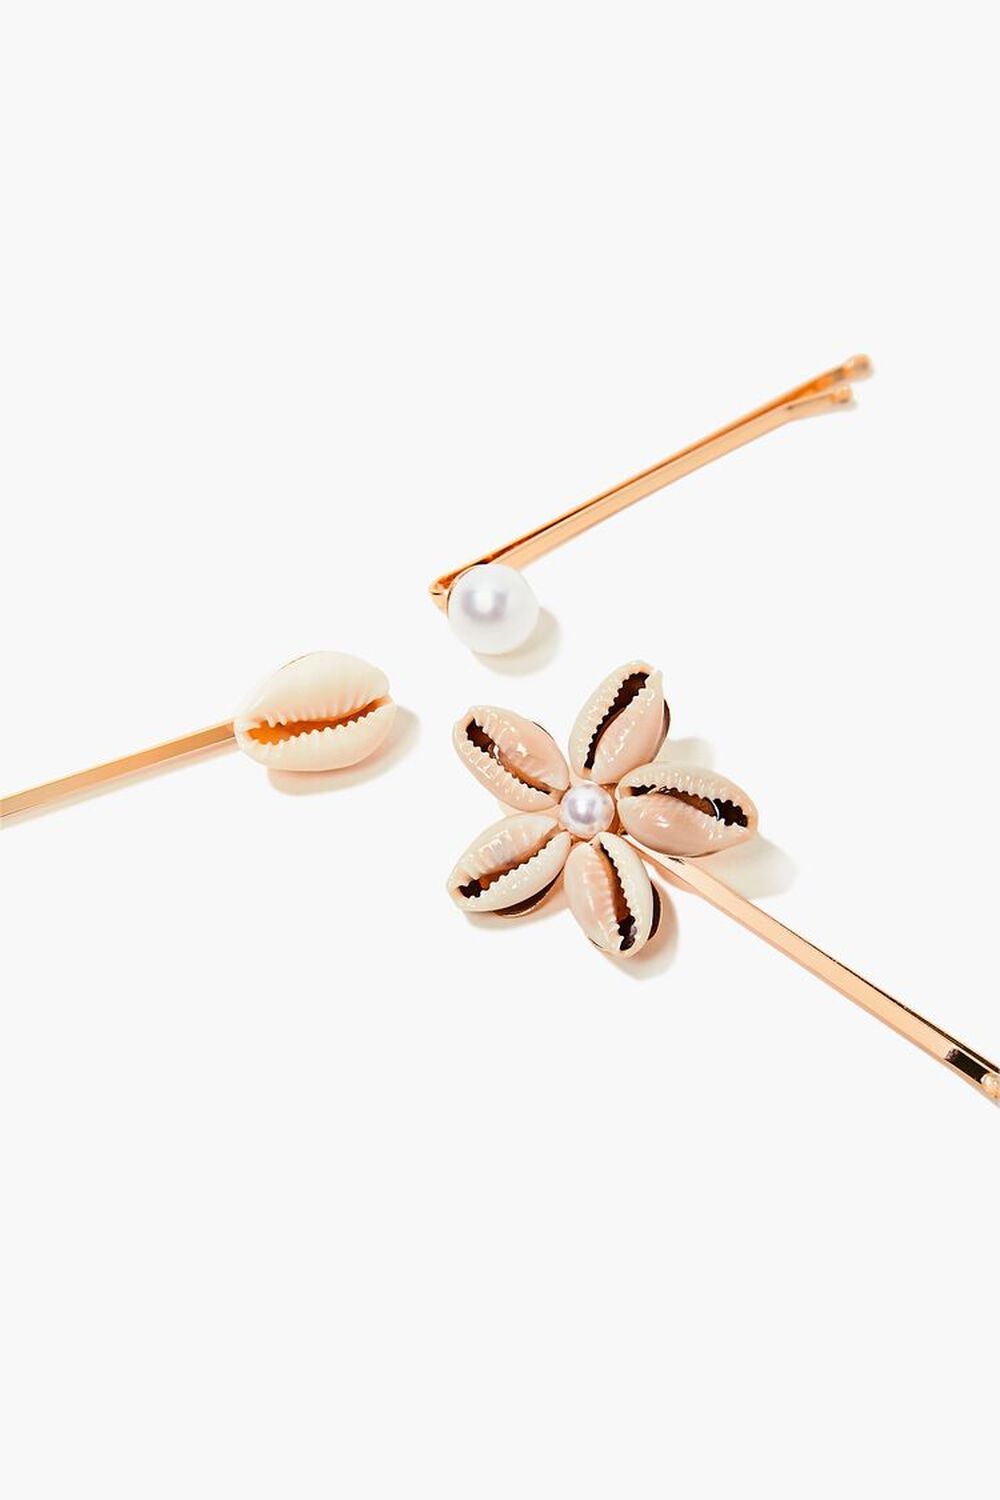 GOLD Cowrie Shell Bobby Pin Set, image 1